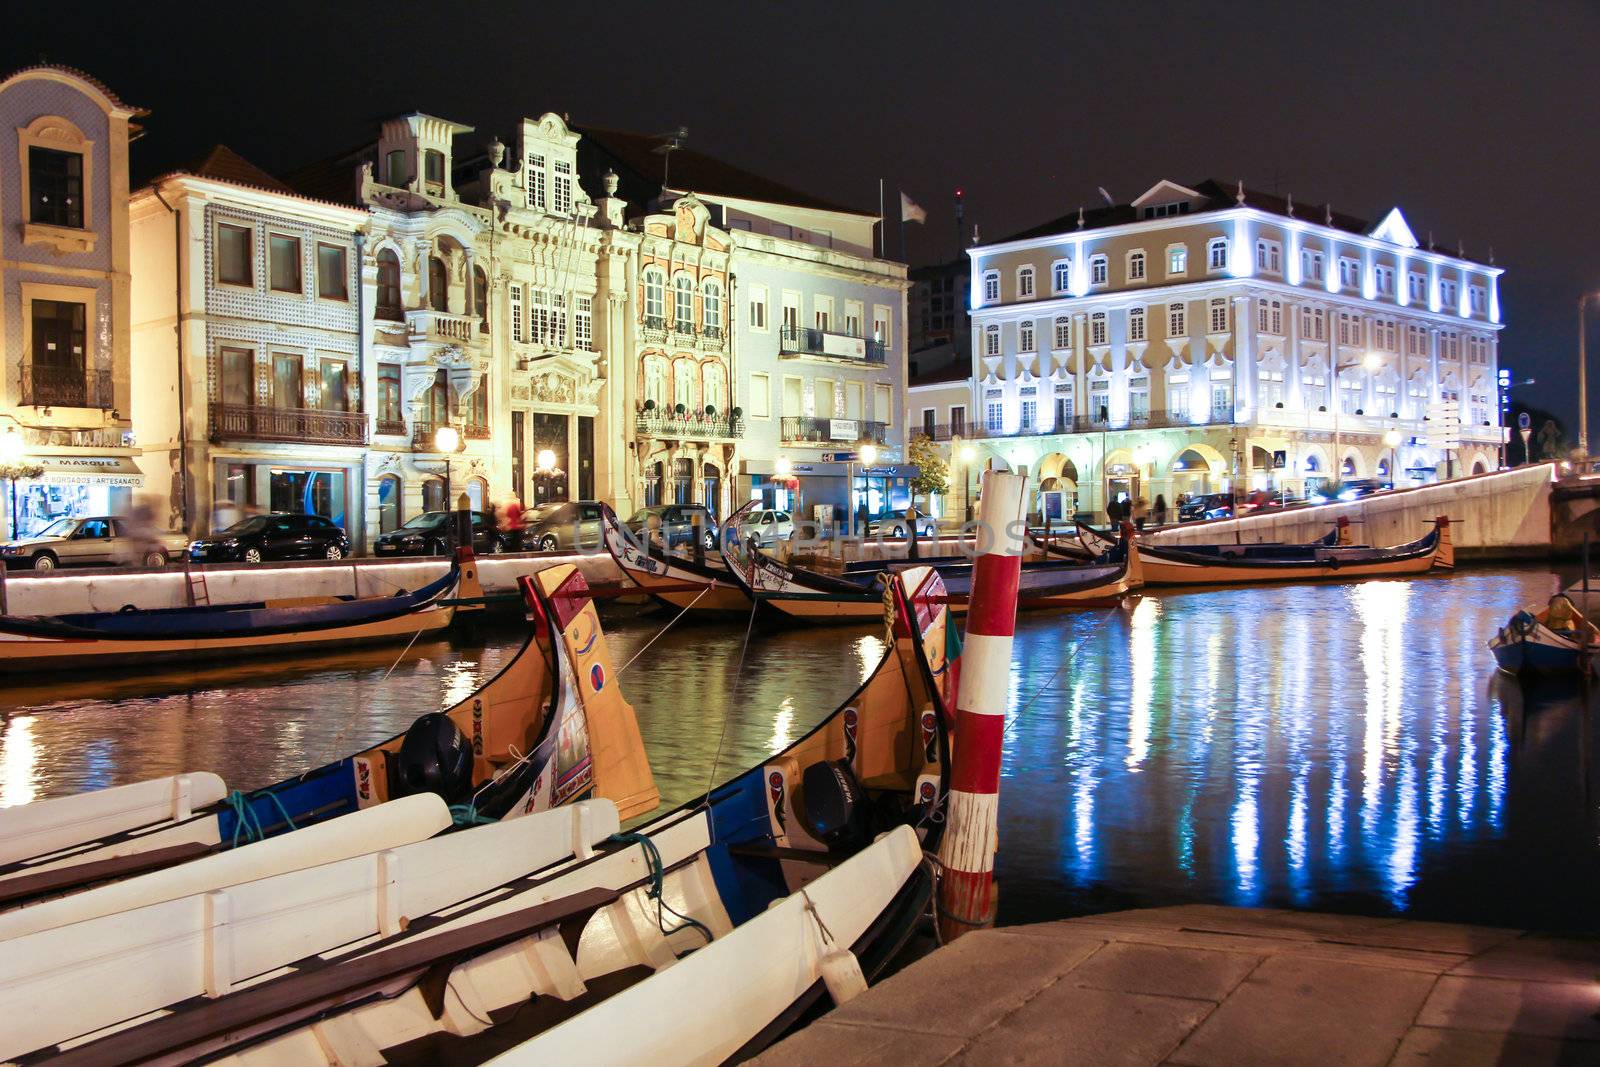 Night view the traditional moliceiro boats in the canal of Aveir by doble.d